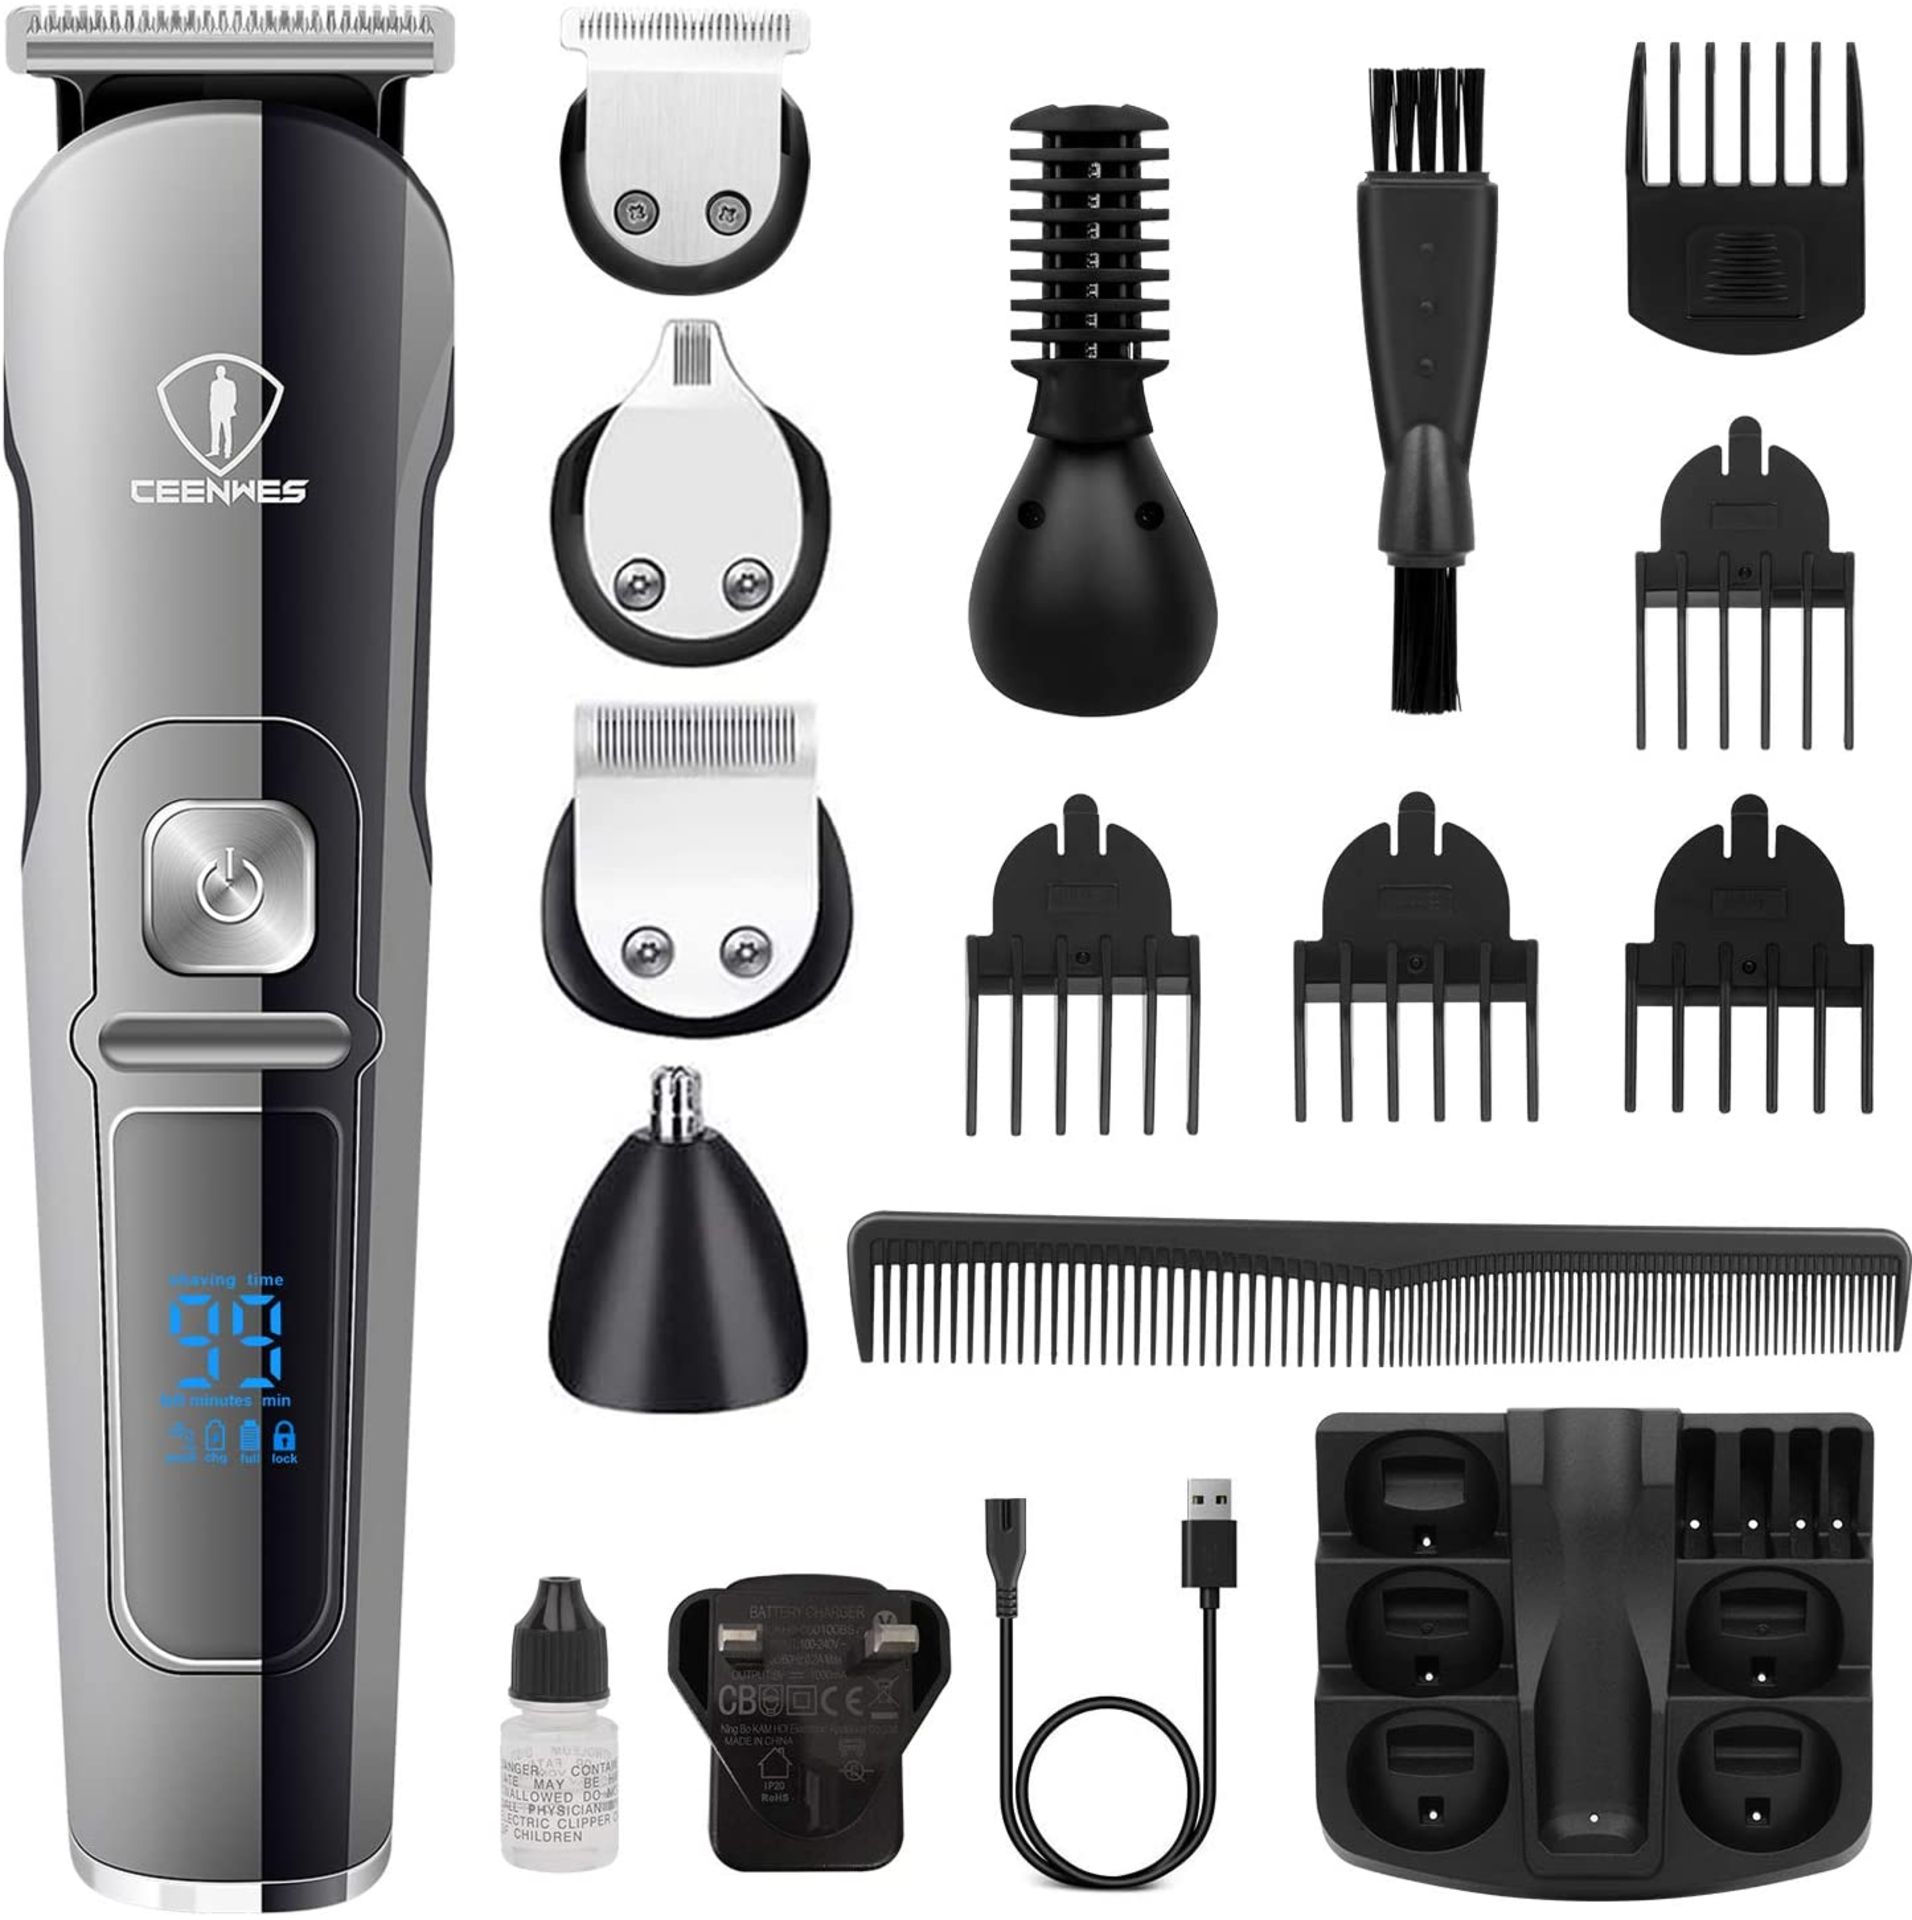 RRP £24 Ceenwes Beard Trimmer Hair Clippers Professional Mens Grooming Kit Cordless Waterproof Nose